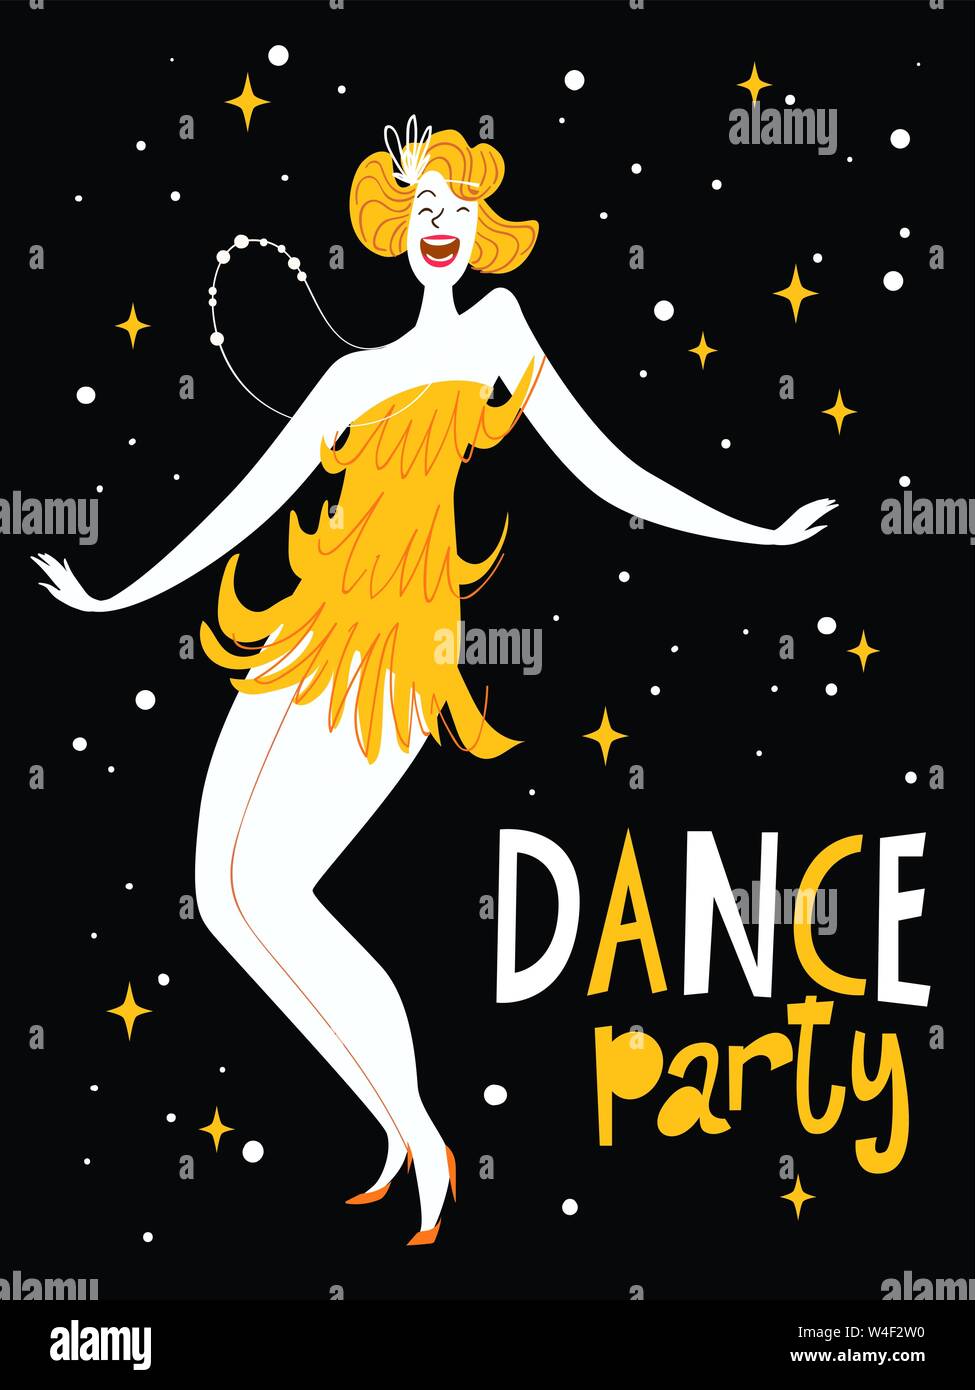 Dance party design for invitation or poster Stock Vector